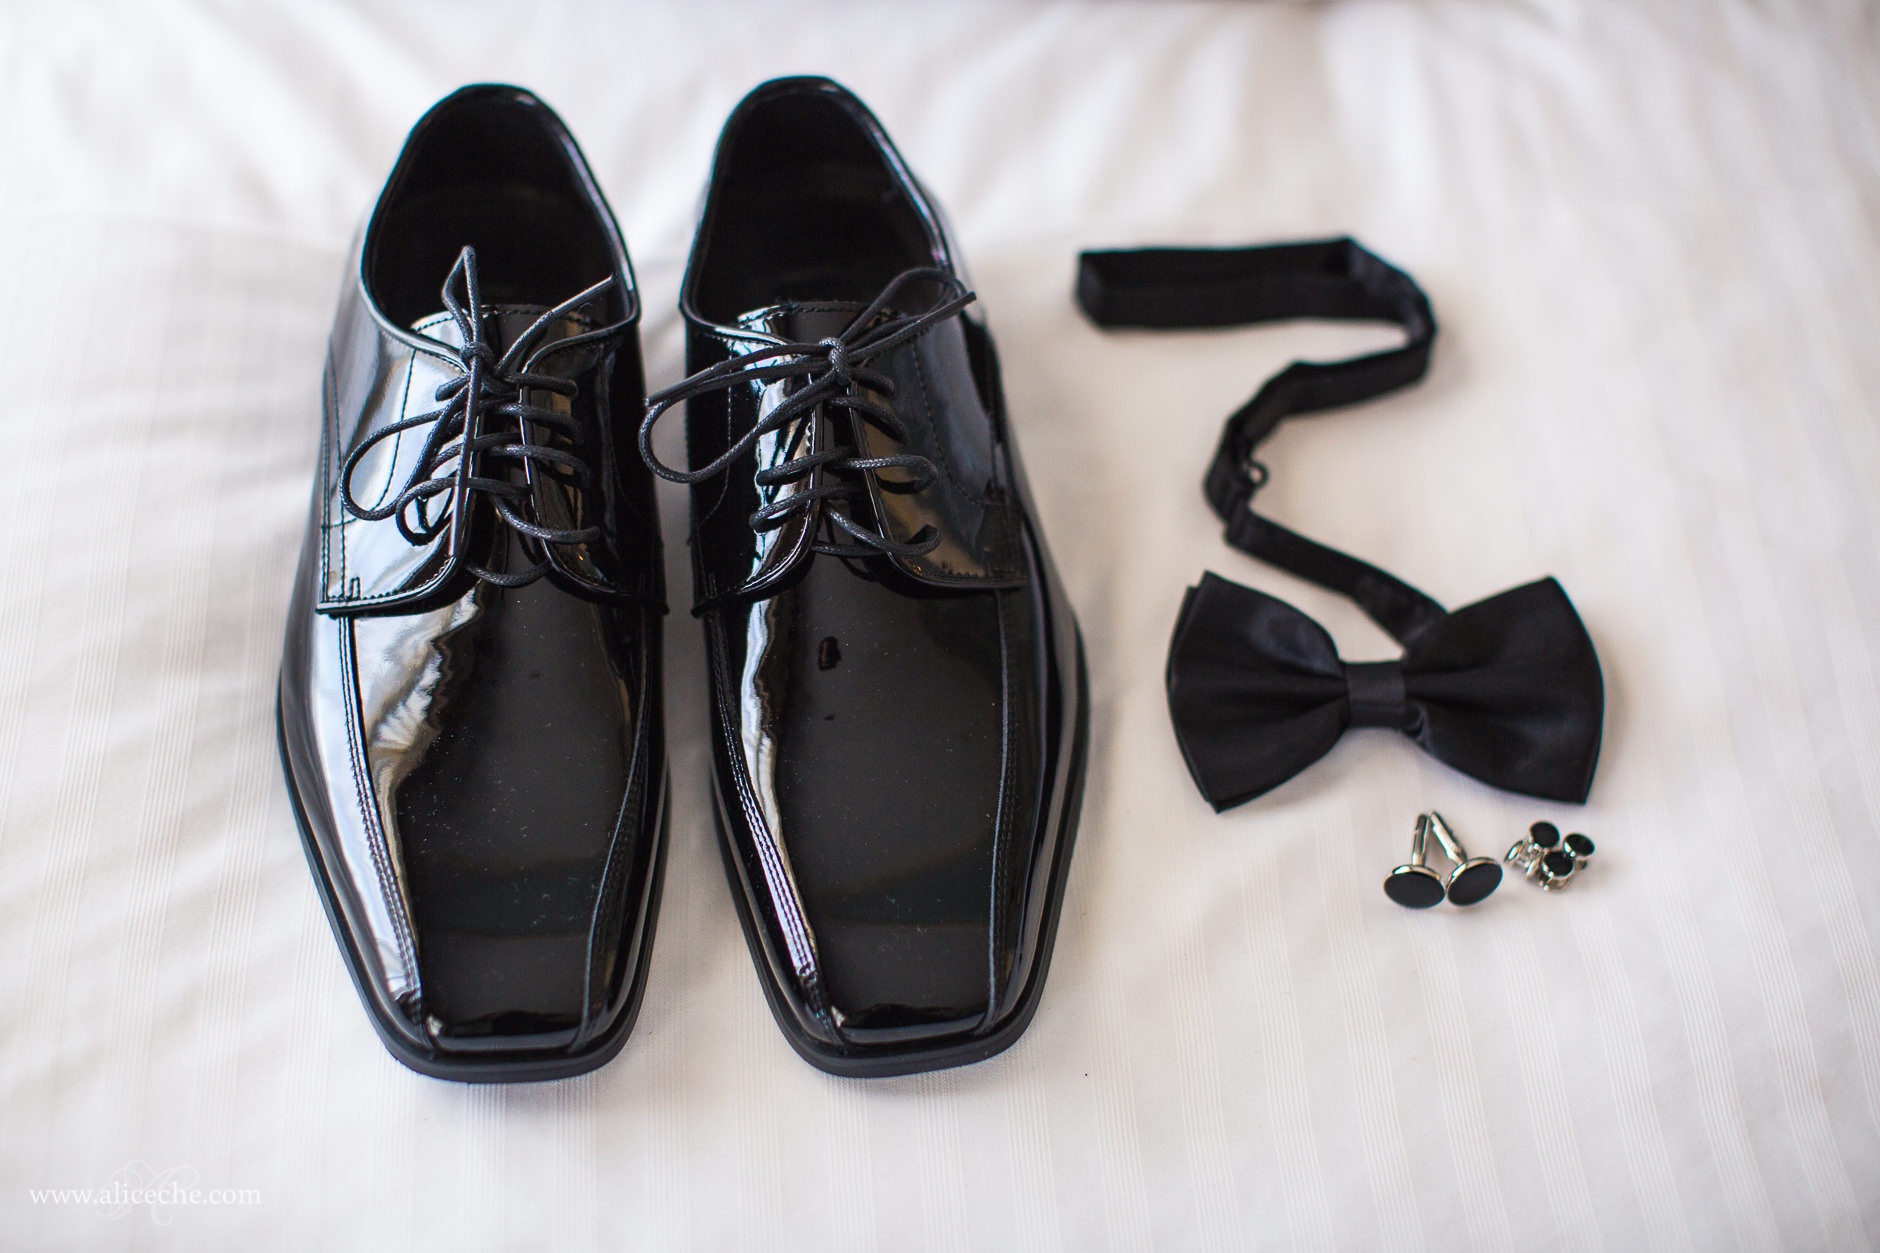 Groom's Shoes, bow tie and cufflinks for Berkeley wedding